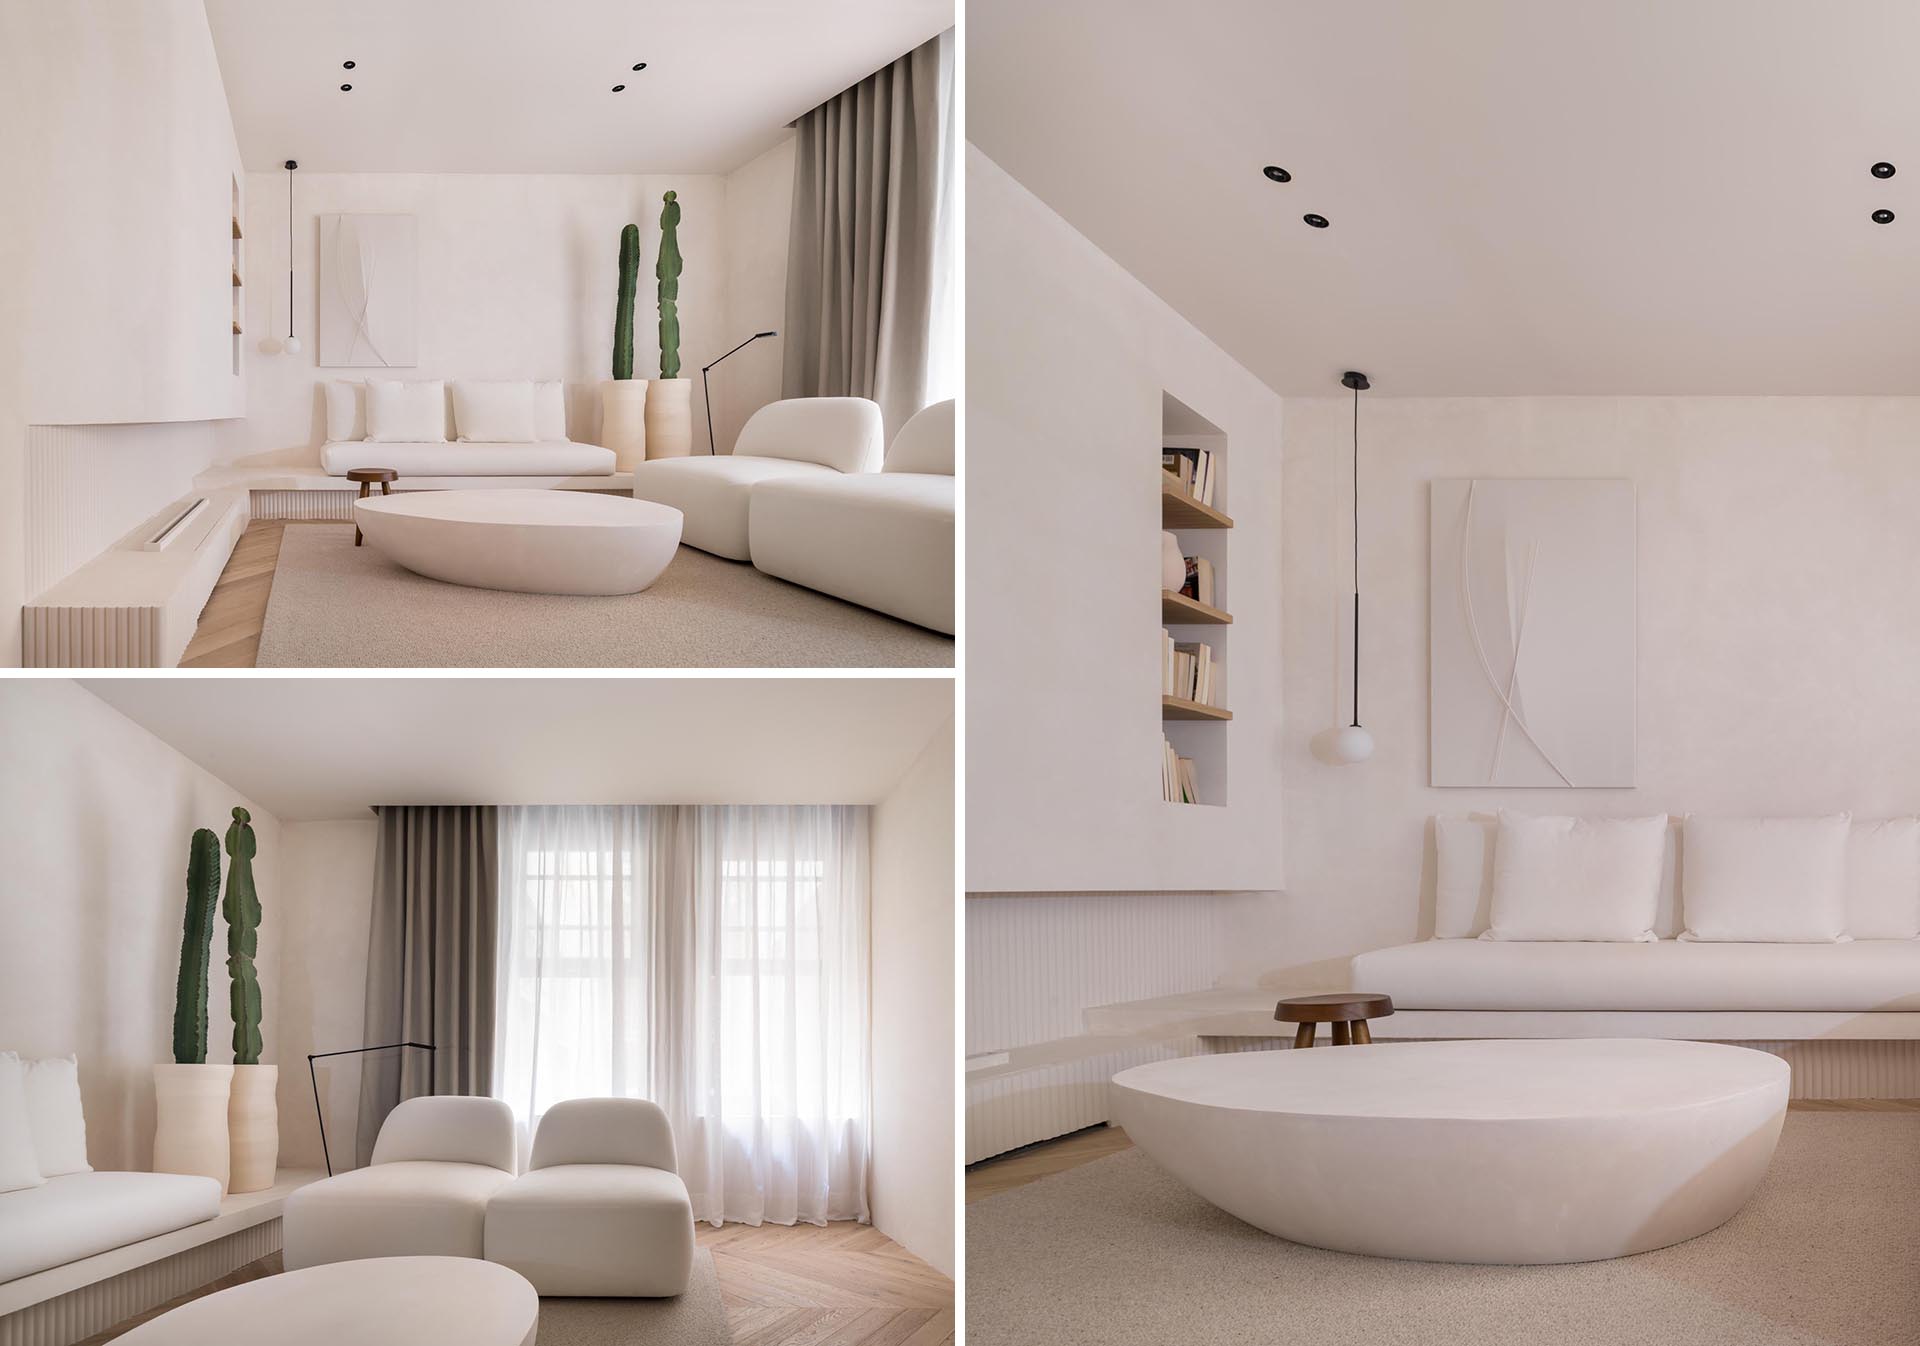 A living room with a simple white color palette and curved edges that creates a calm environment with a modern flair.